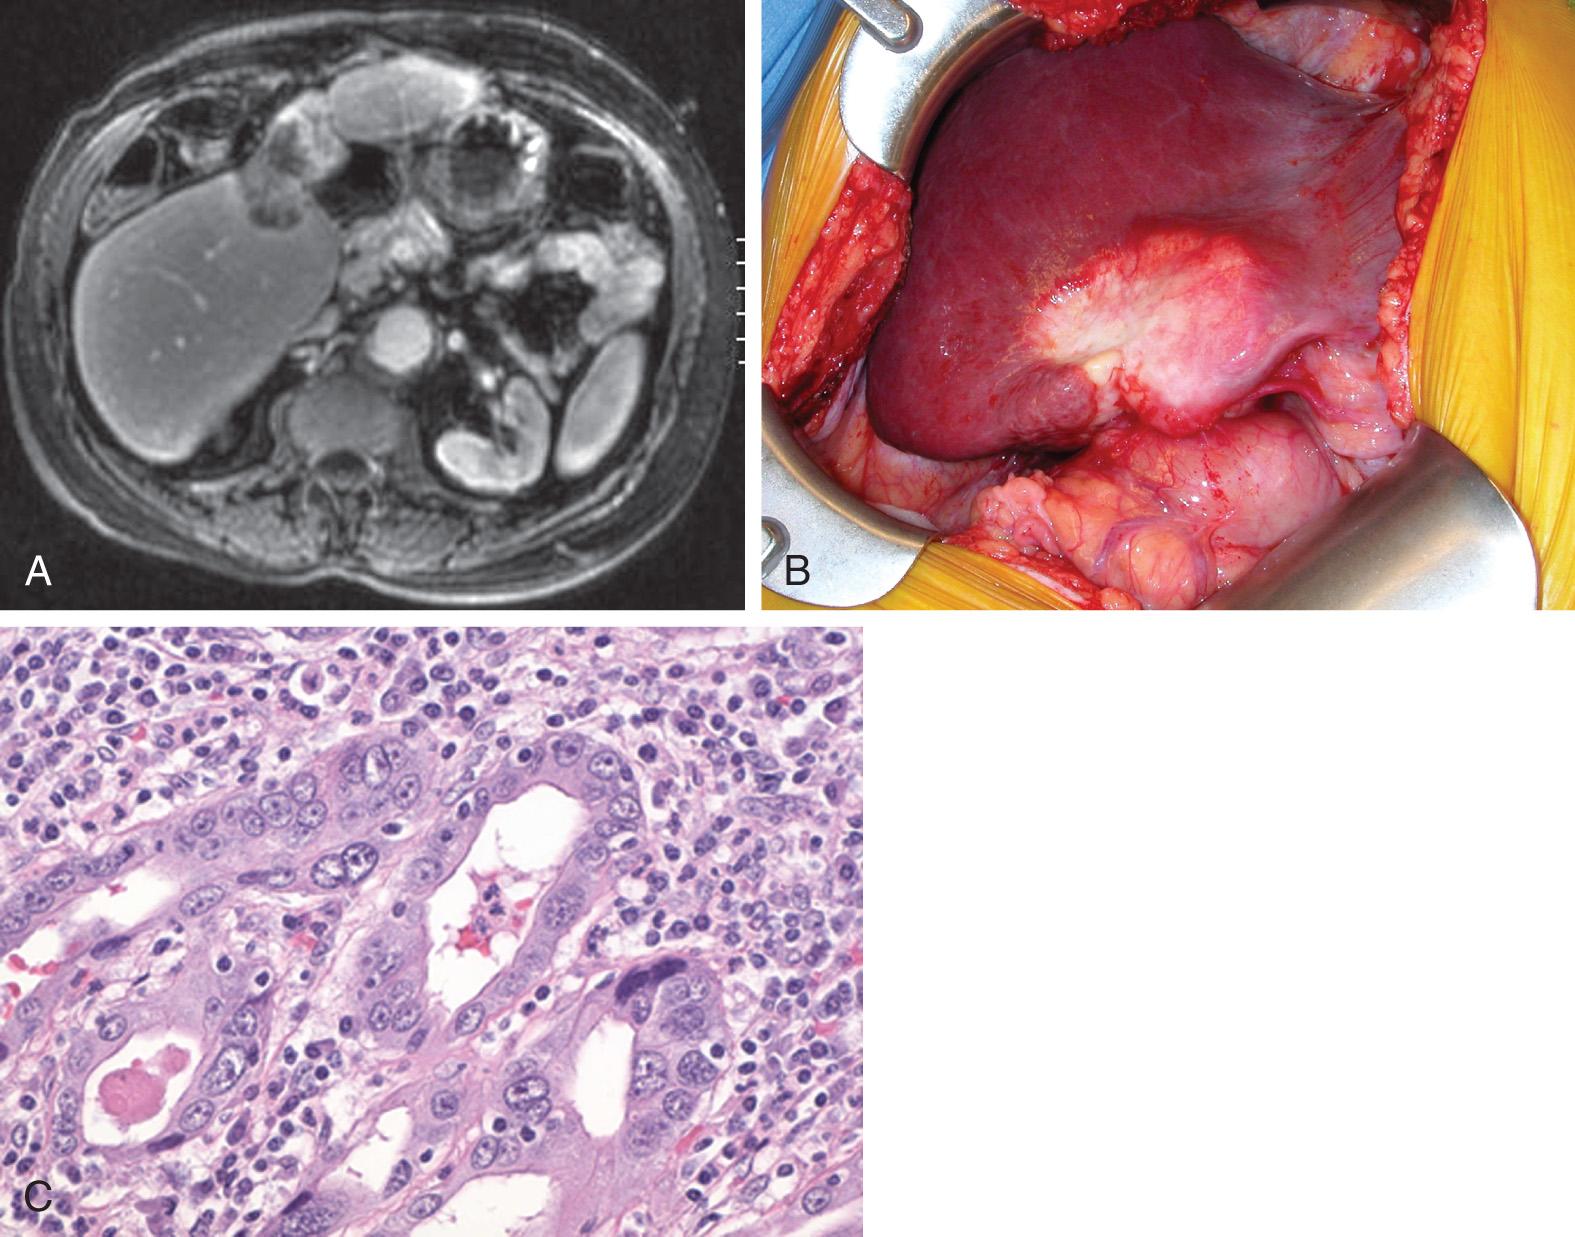 FIGURE 133.1, (A) Magnetic resonance imaging demonstrating a 6-cm intrahepatic cholangiocarcinoma involving the left hemiliver. (B) Intraoperative photograph demonstrating the same tumor prior to planned resection. (C) Photomicrograph of an intrahepatic cholangiocarcinoma. The small glandular structures with nuclei are oval and vesicular. There is also demonstrable mucin production within the ducts.